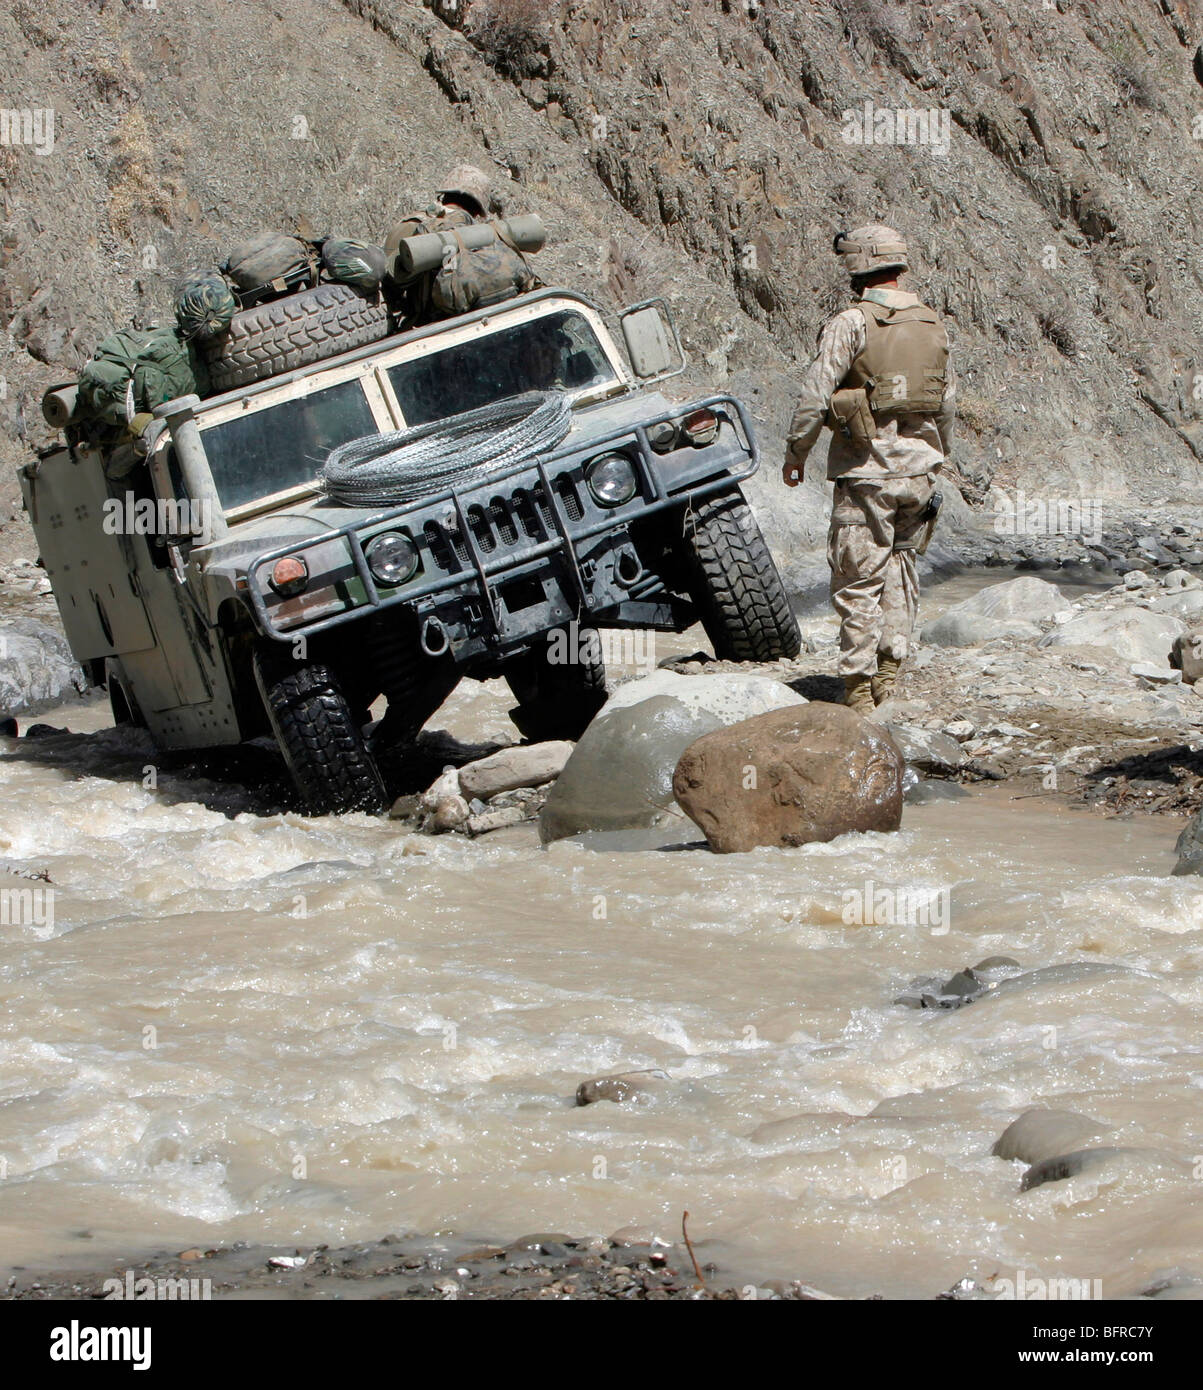 A U.S. Marine guiding the driver of a Humvee through a river in Khowst Province of Afghanistan. Stock Photo